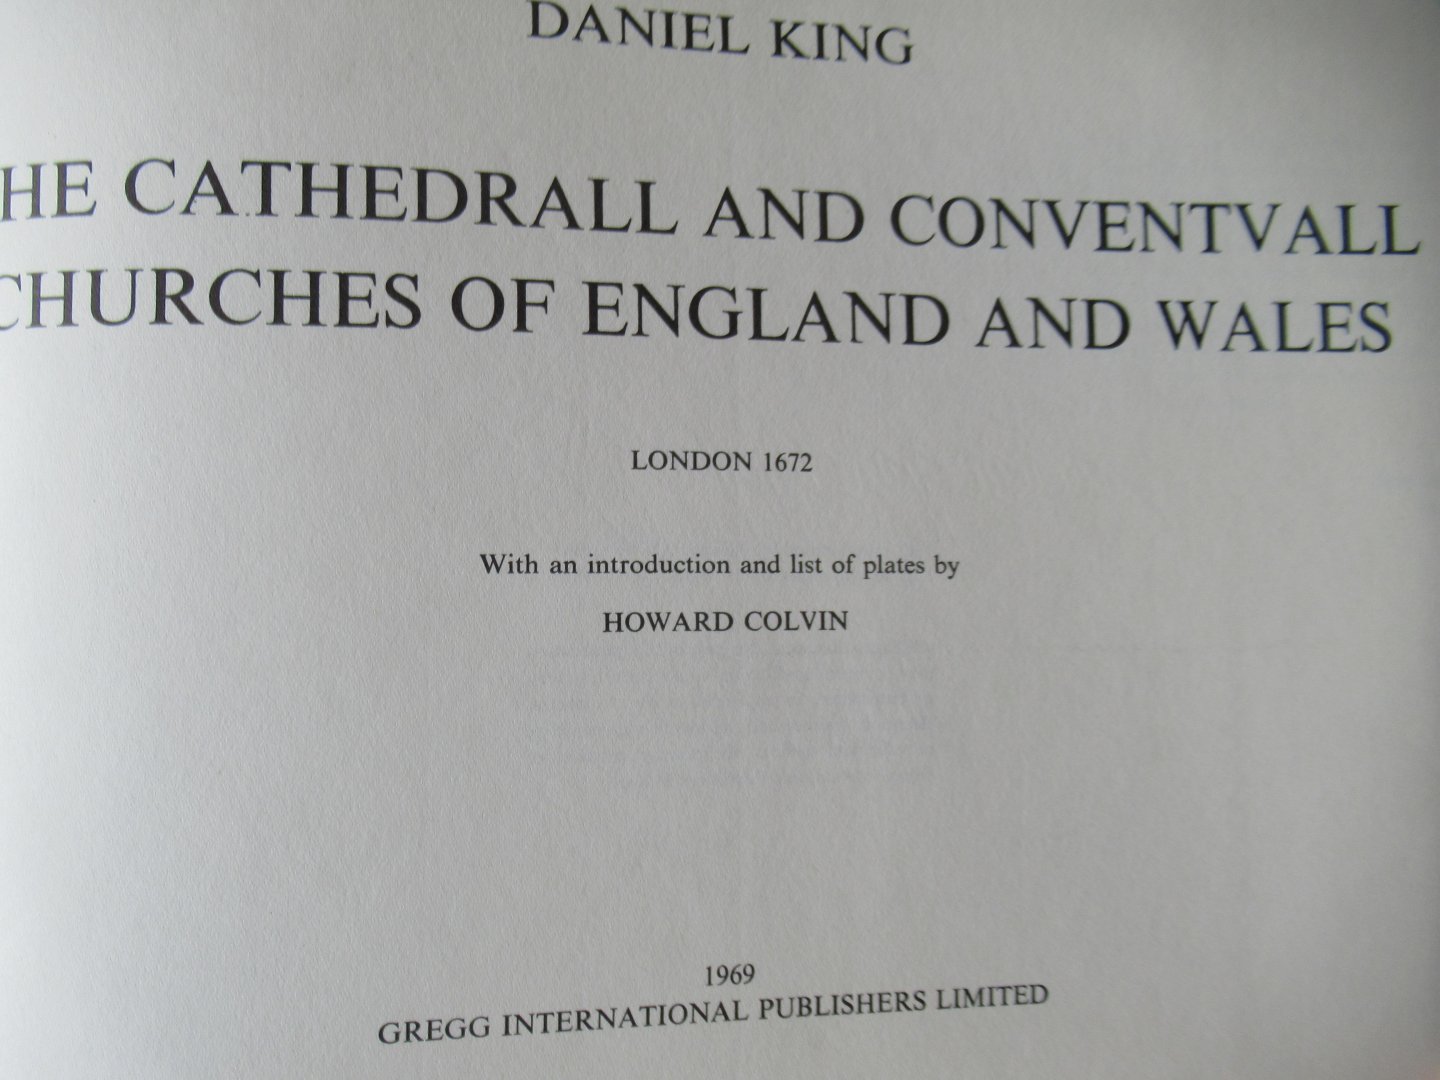 King, Daniel - The cathedrall and conventvall churches of England and Wales